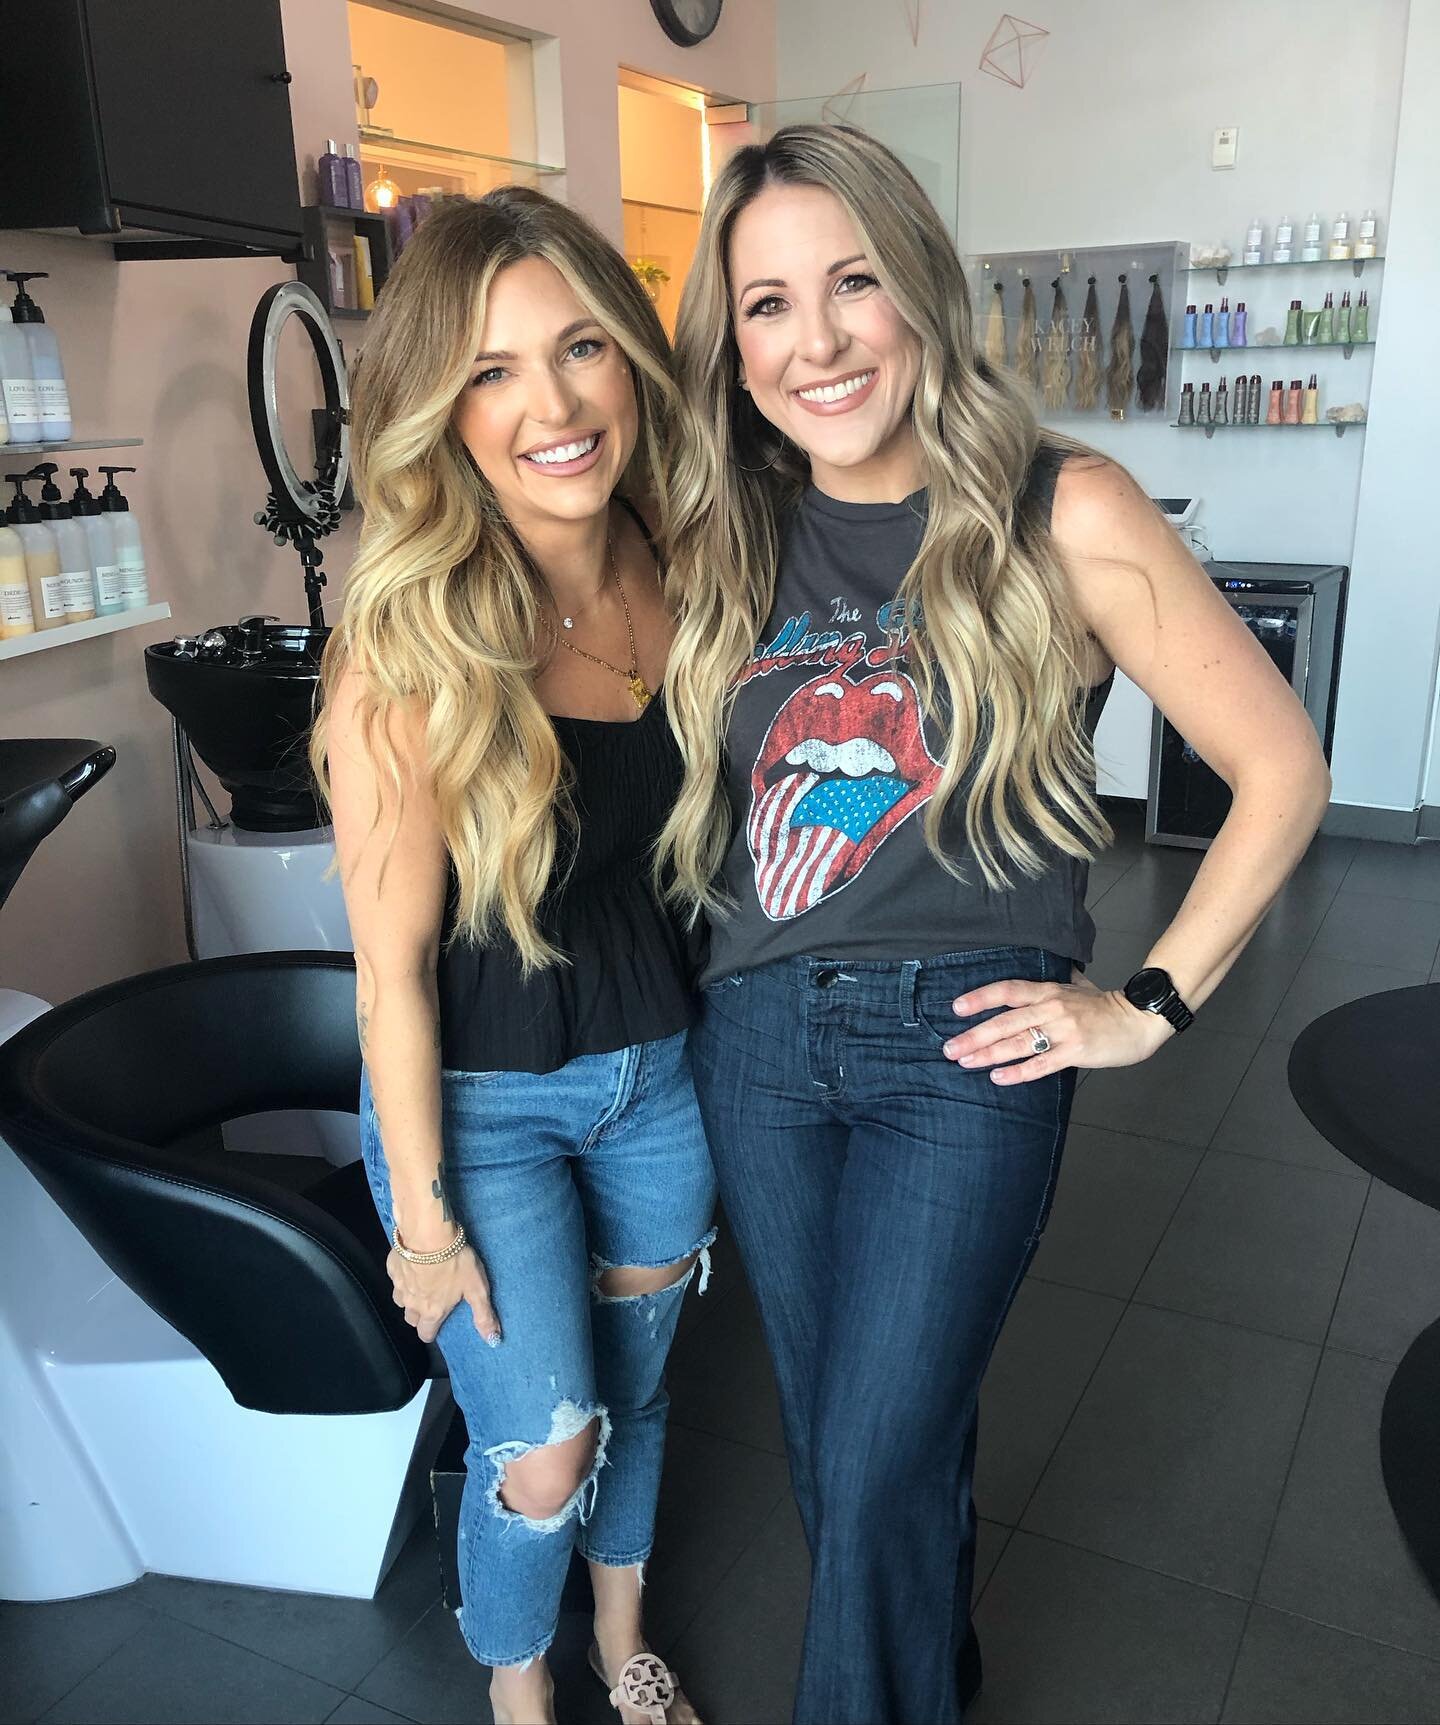 If you don&rsquo;t know about this woman yet you need to! Meagan- @sheismeaganlee Is one of the most genuine boss babes I know! She does it all and all so well! I did a content shoot today for my Salon @titaniumsalonaz and Meagan did mine and the tea